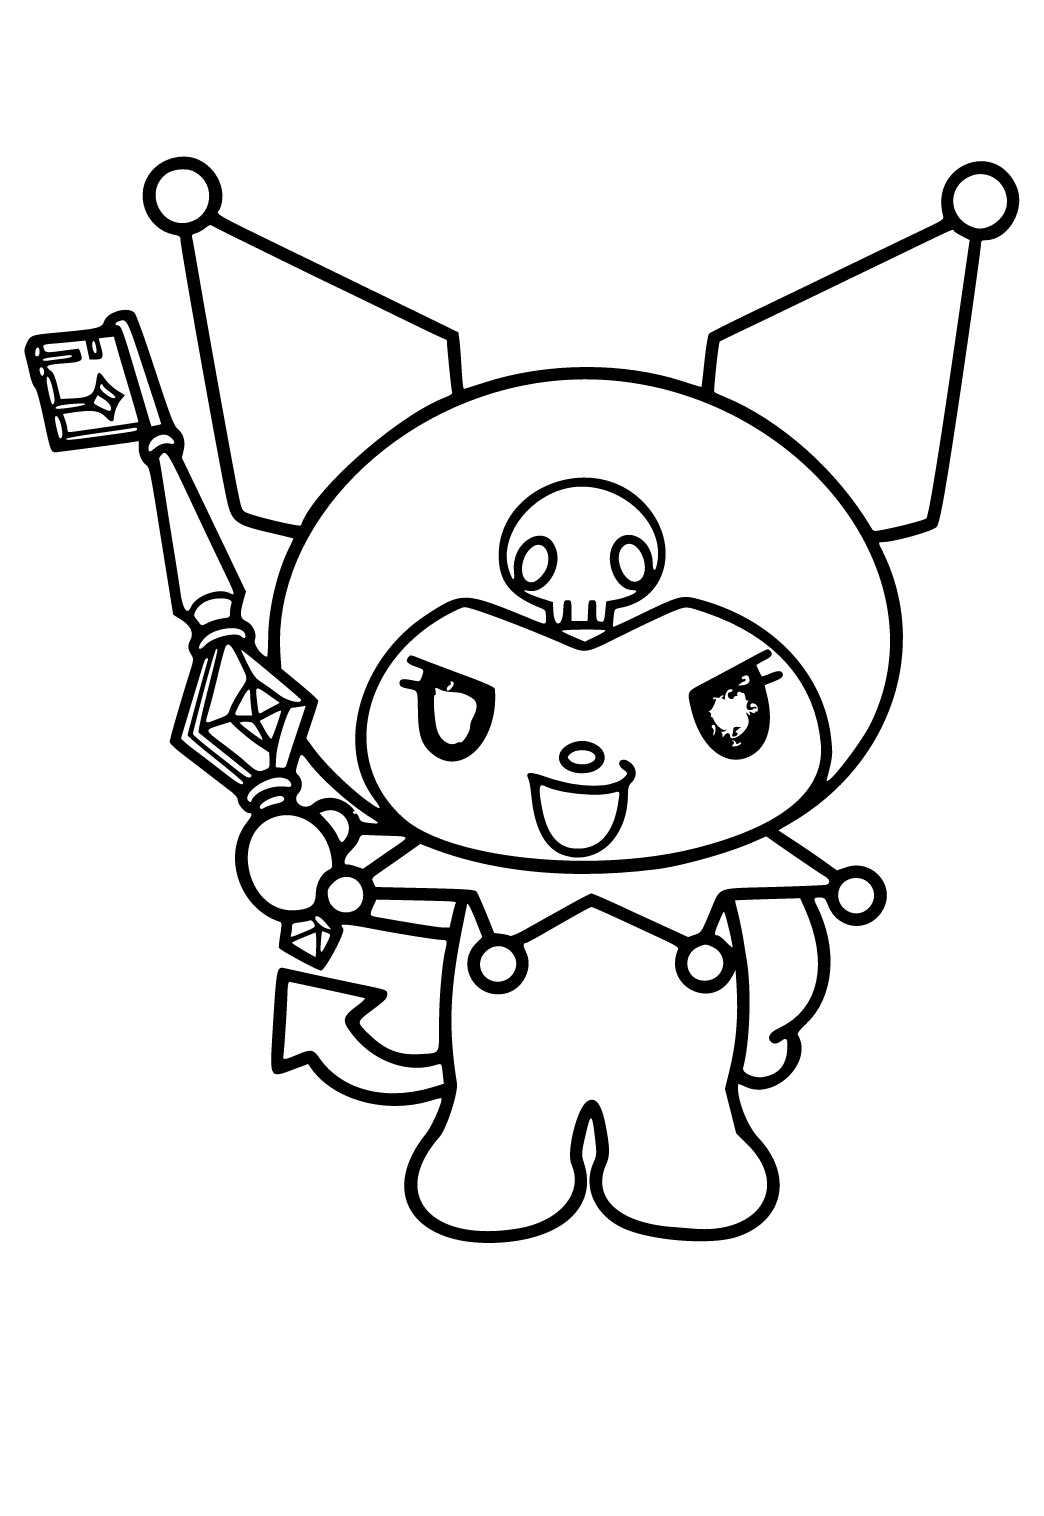 Free printable my melody key coloring page for adults and kids